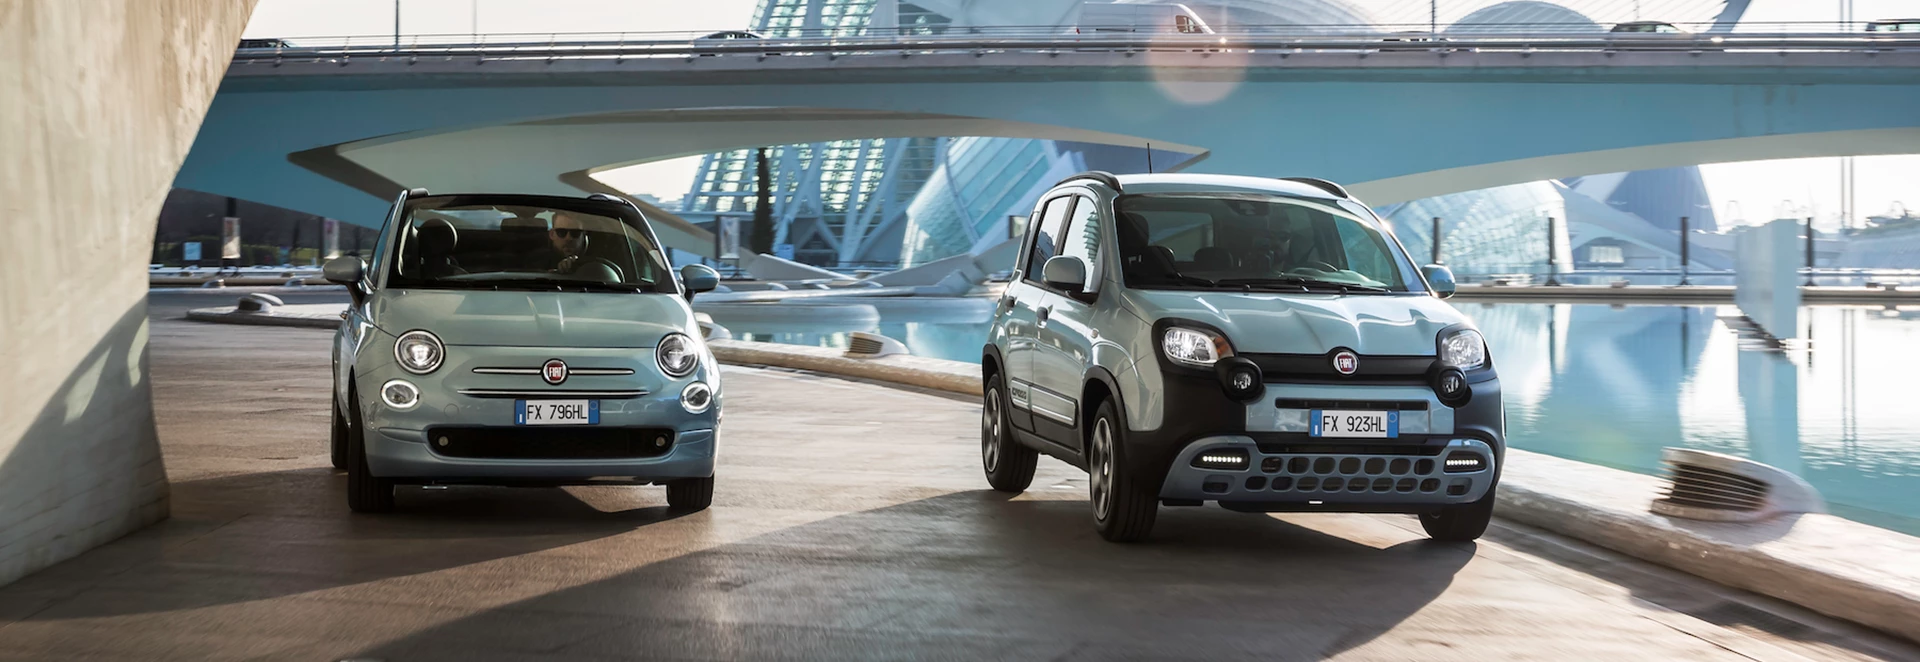 Prices and specs announced for new Fiat 500 hybrid and Panda hybrid